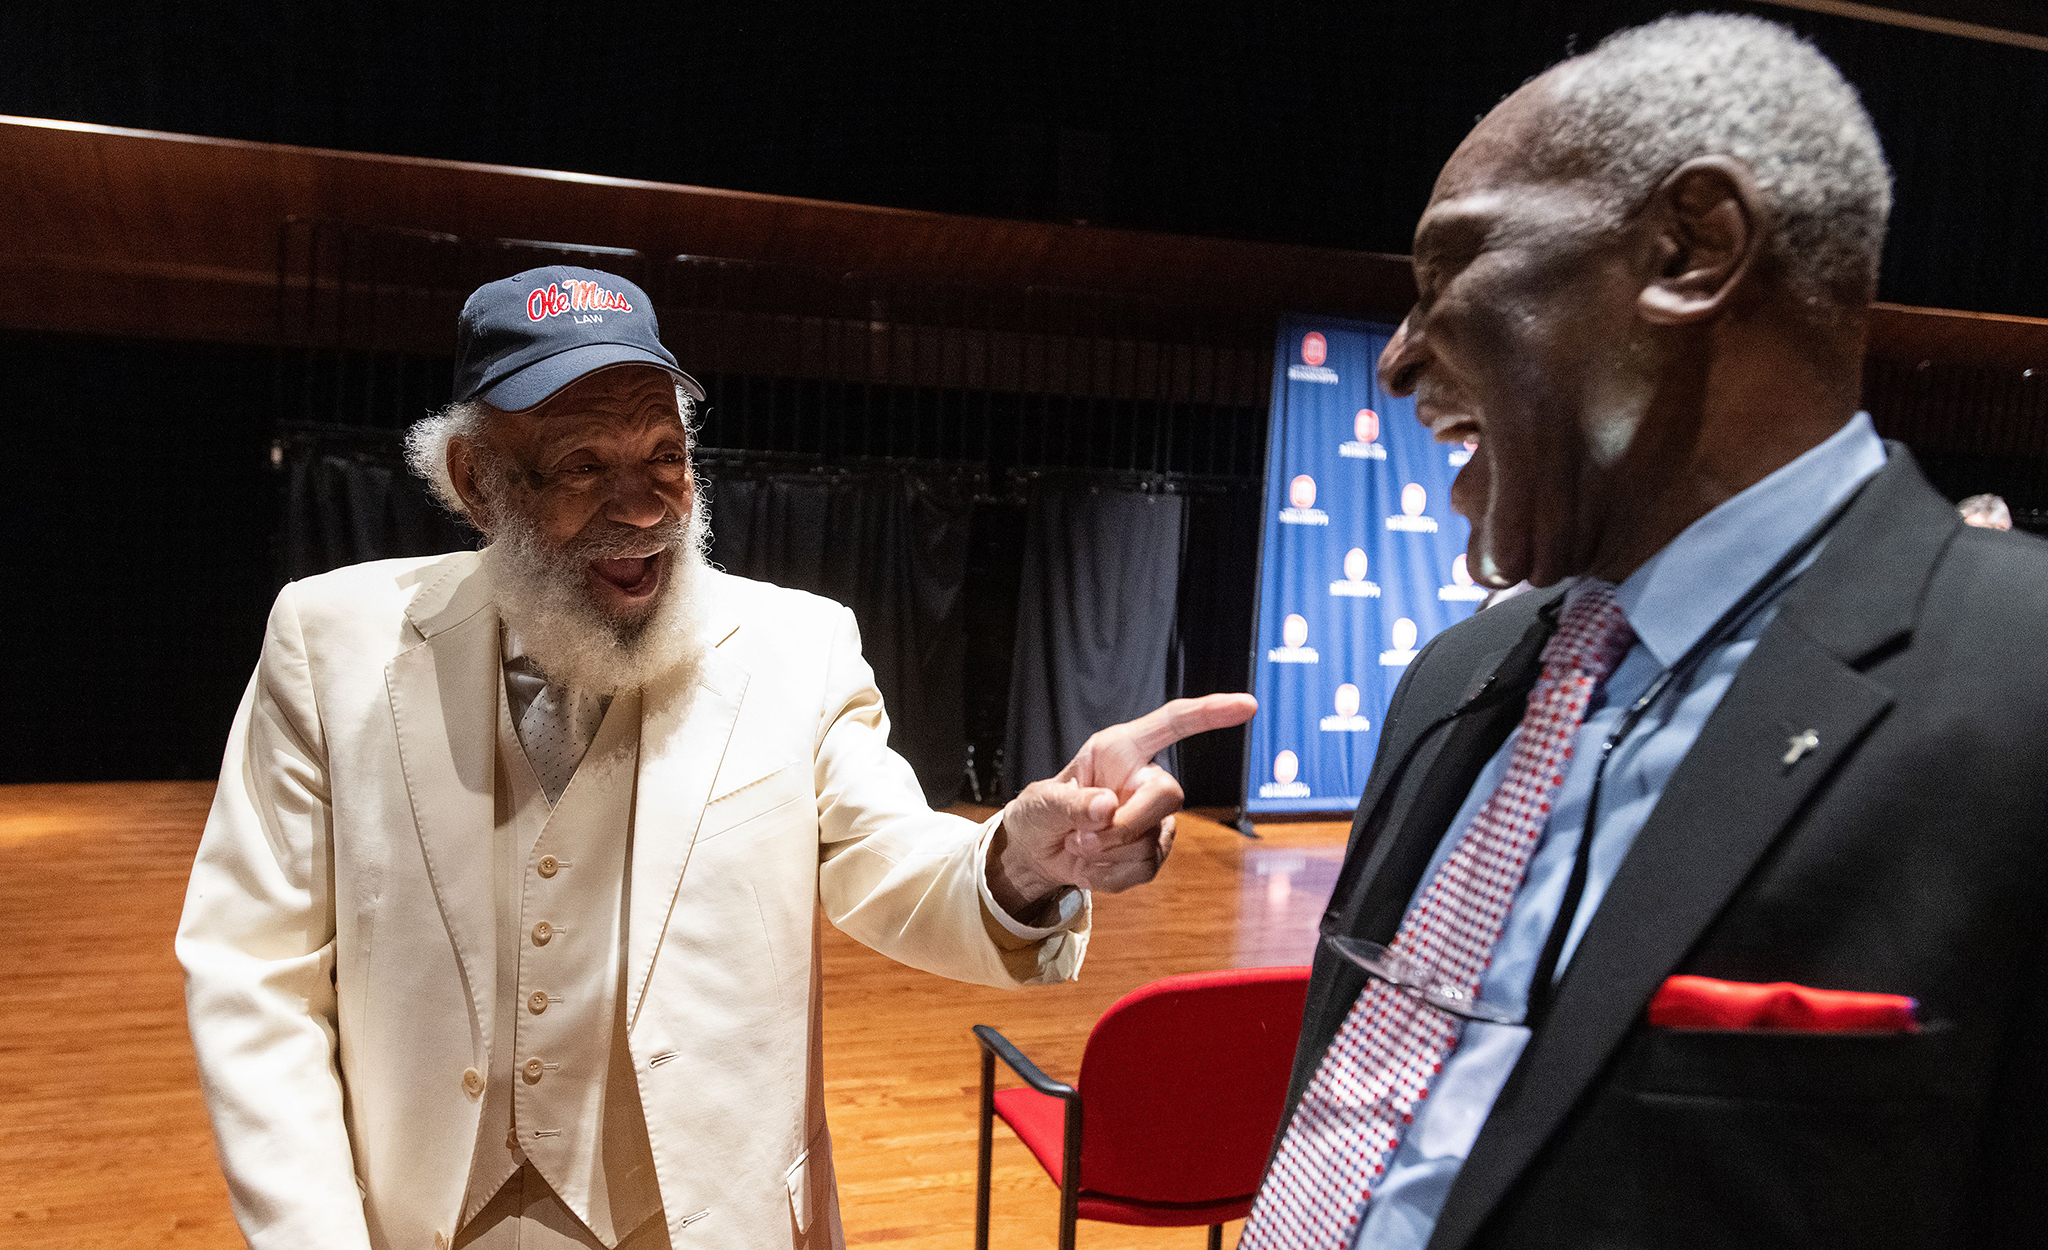 James Meredith (left) shares a laugh with Don Cole, former mathematics professor and longtime university administrator, after Wednesday evening’s (Sept. 28) program in the Ford Center. Photo by Thomas Graning/Ole Miss Digital Imaging Services